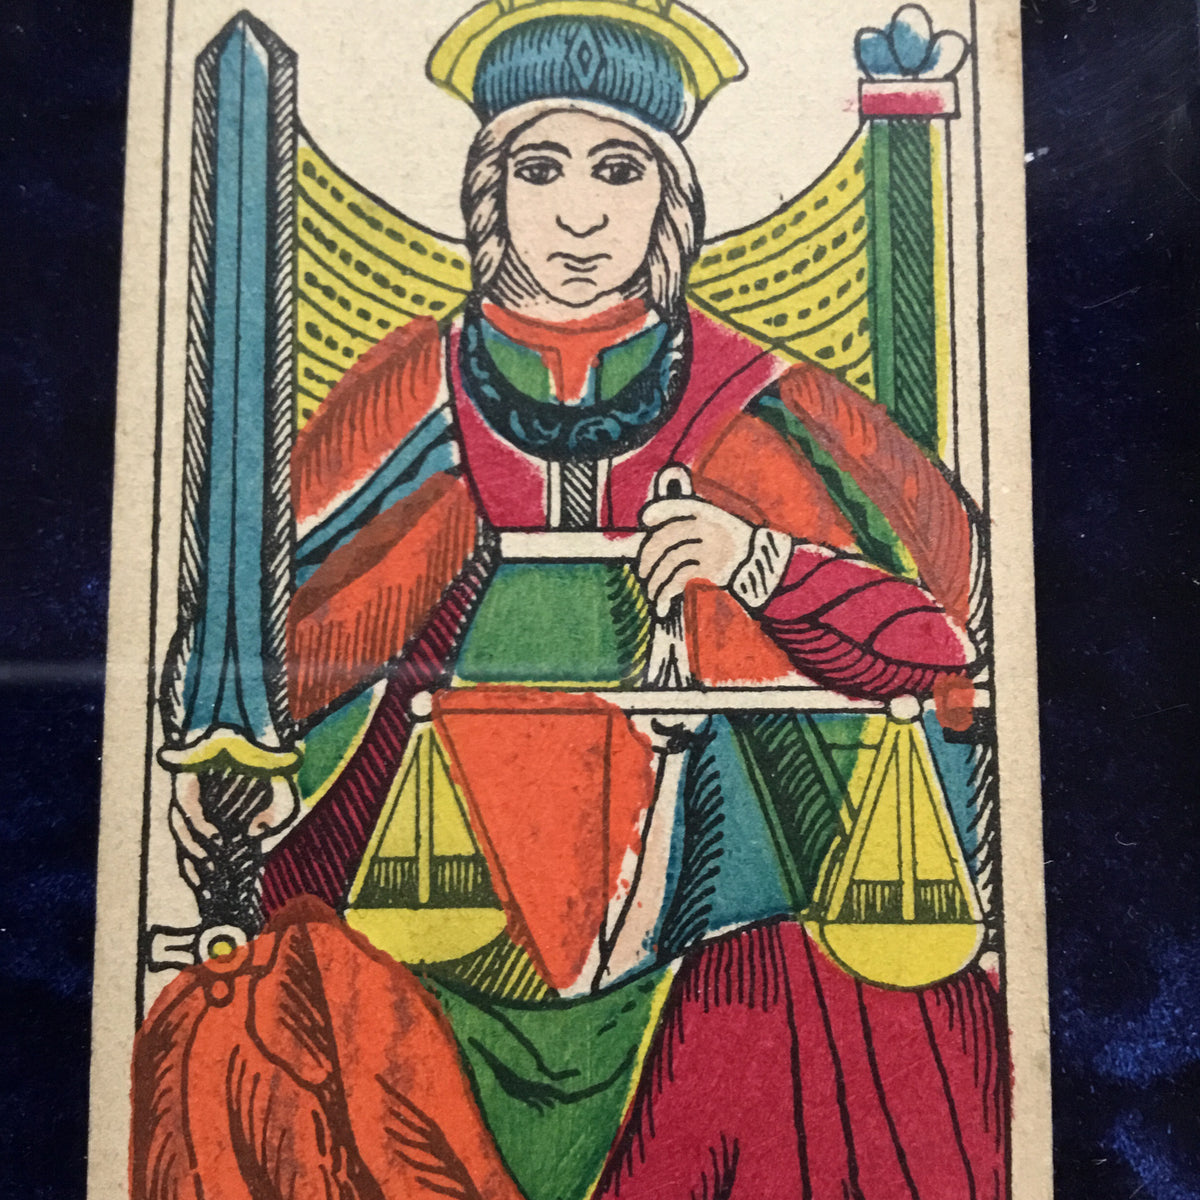 “justice” Historical Antique Hand Painted Tarot Card 1890s Deviant